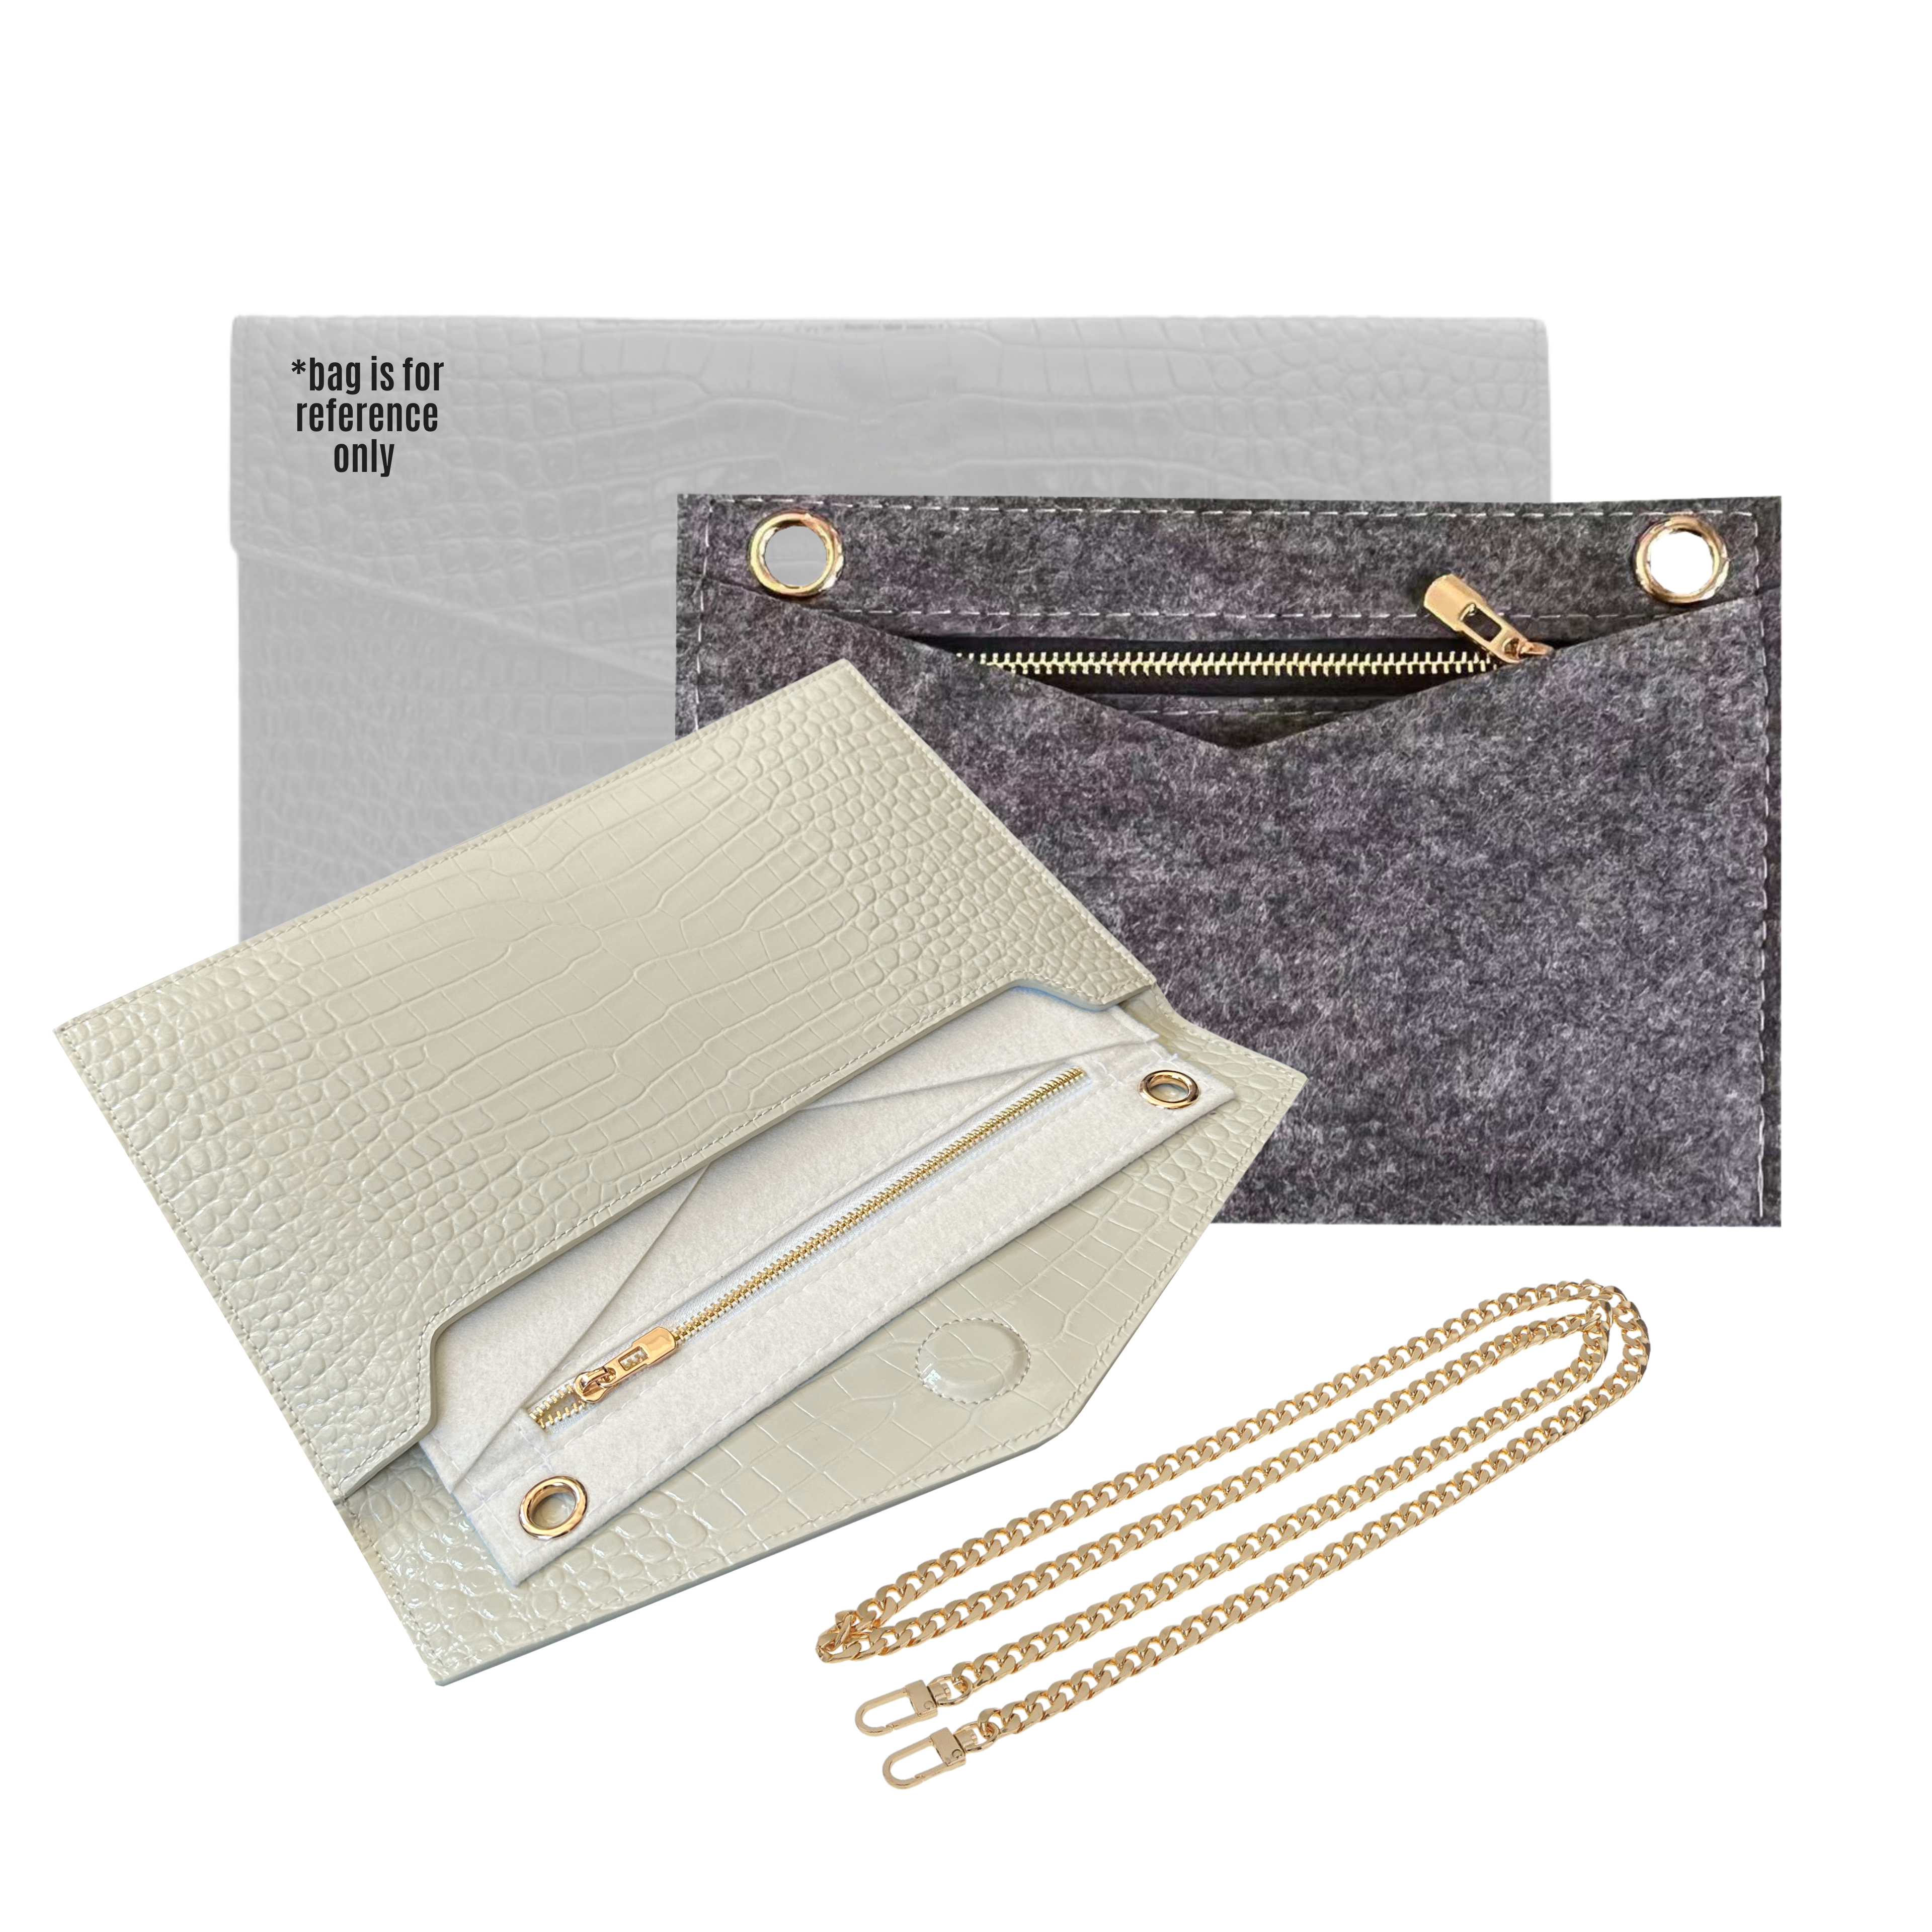 Conversion Kit for Conversion Kit for Uptown Clutch YSL | Accessory for YSL Swing | Yves Saint Laurent Strap | Designer Purse Insert | YSL Handbag Strap | Bag Insert Organizer | YSL Swing Strap | Luxury Bag Accessory | Bag Protector”